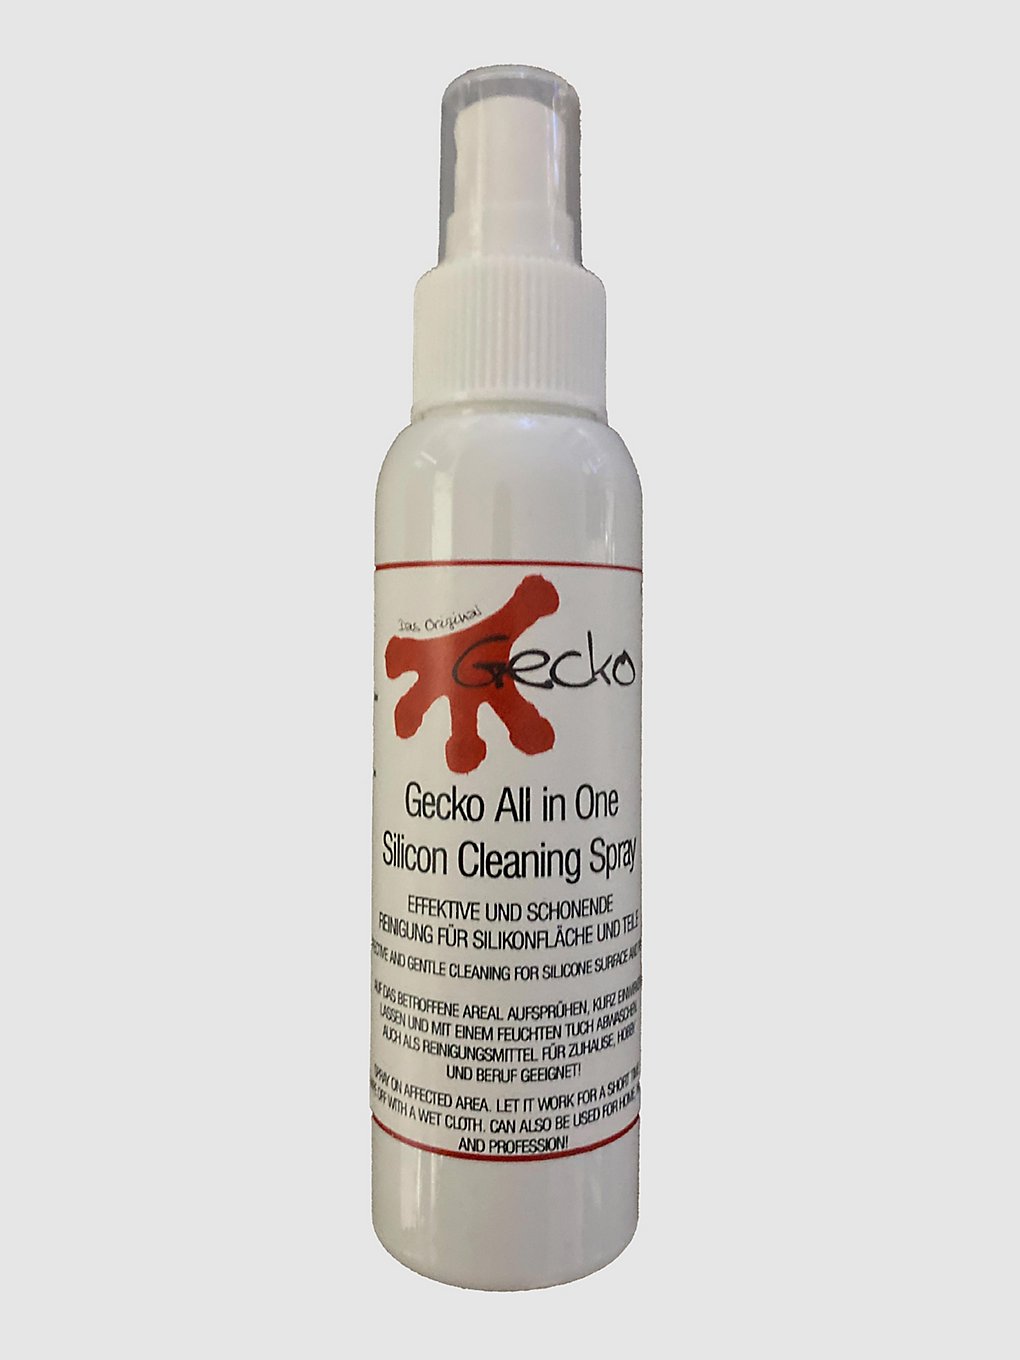 Gecko Silicon Cleaning Spray wit